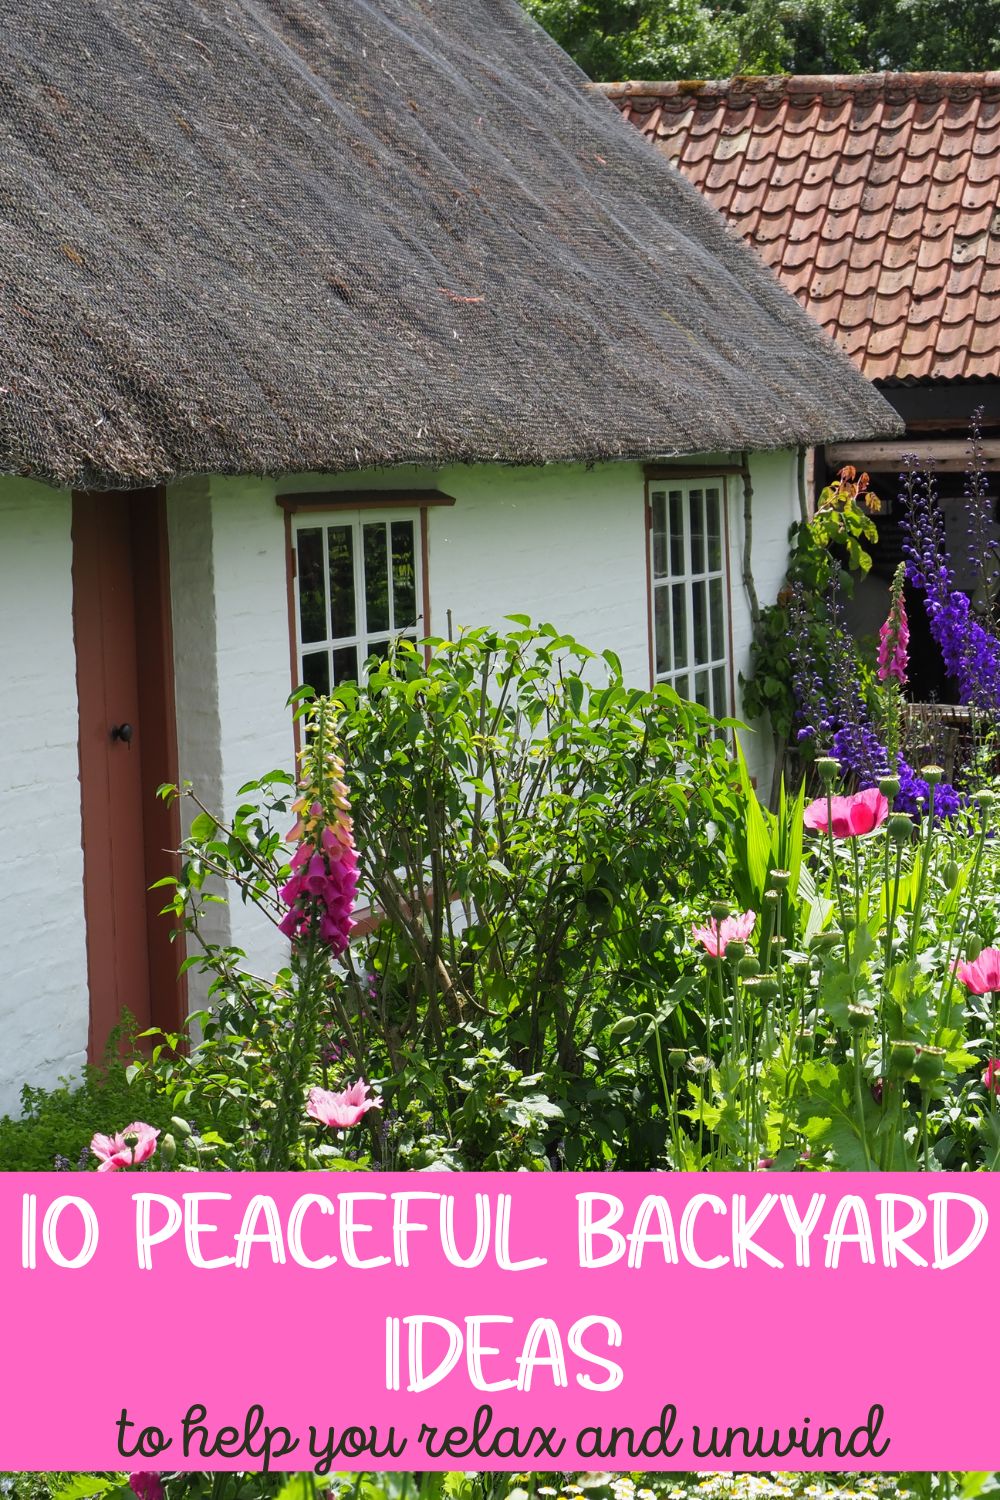 10 peaceful backyard ideas to help you relax and unwind.